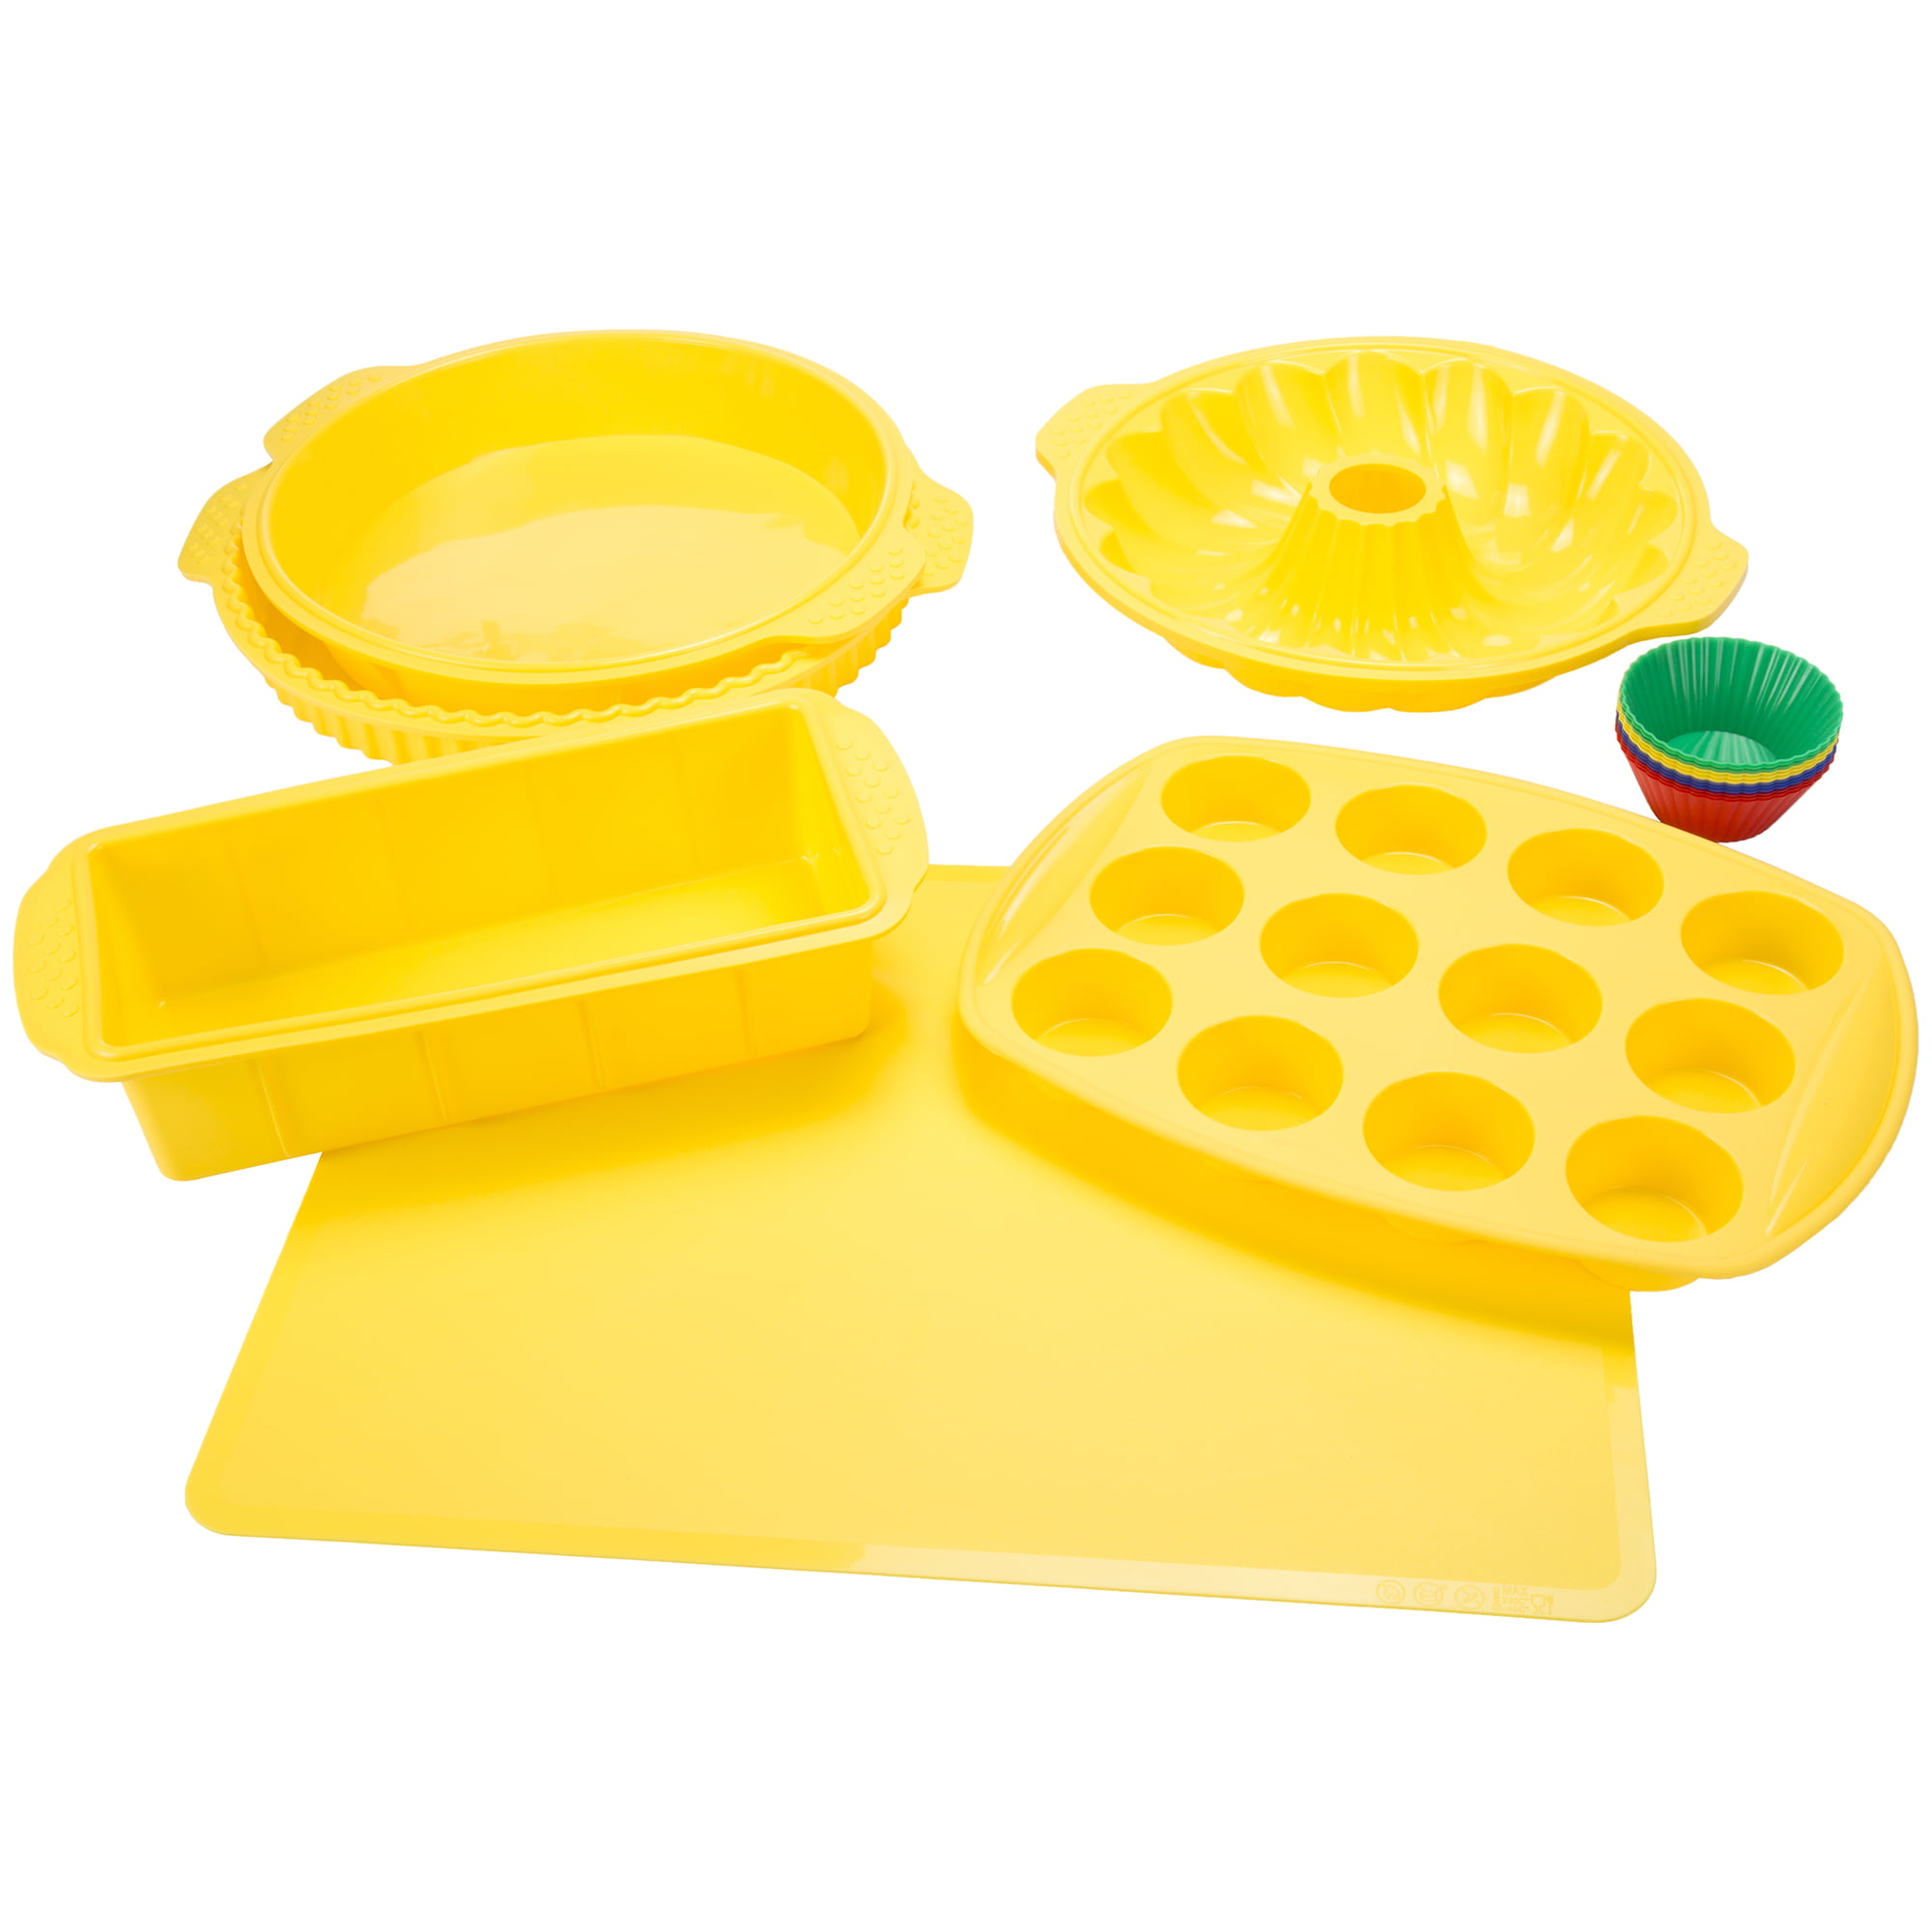 18-Piece Set including Cupcake Molds Muffin Pan Silicone Bakeware Set Bundt Pan Baking Supplies by Classic Cuisine Cookie Sheet Bread Pan 